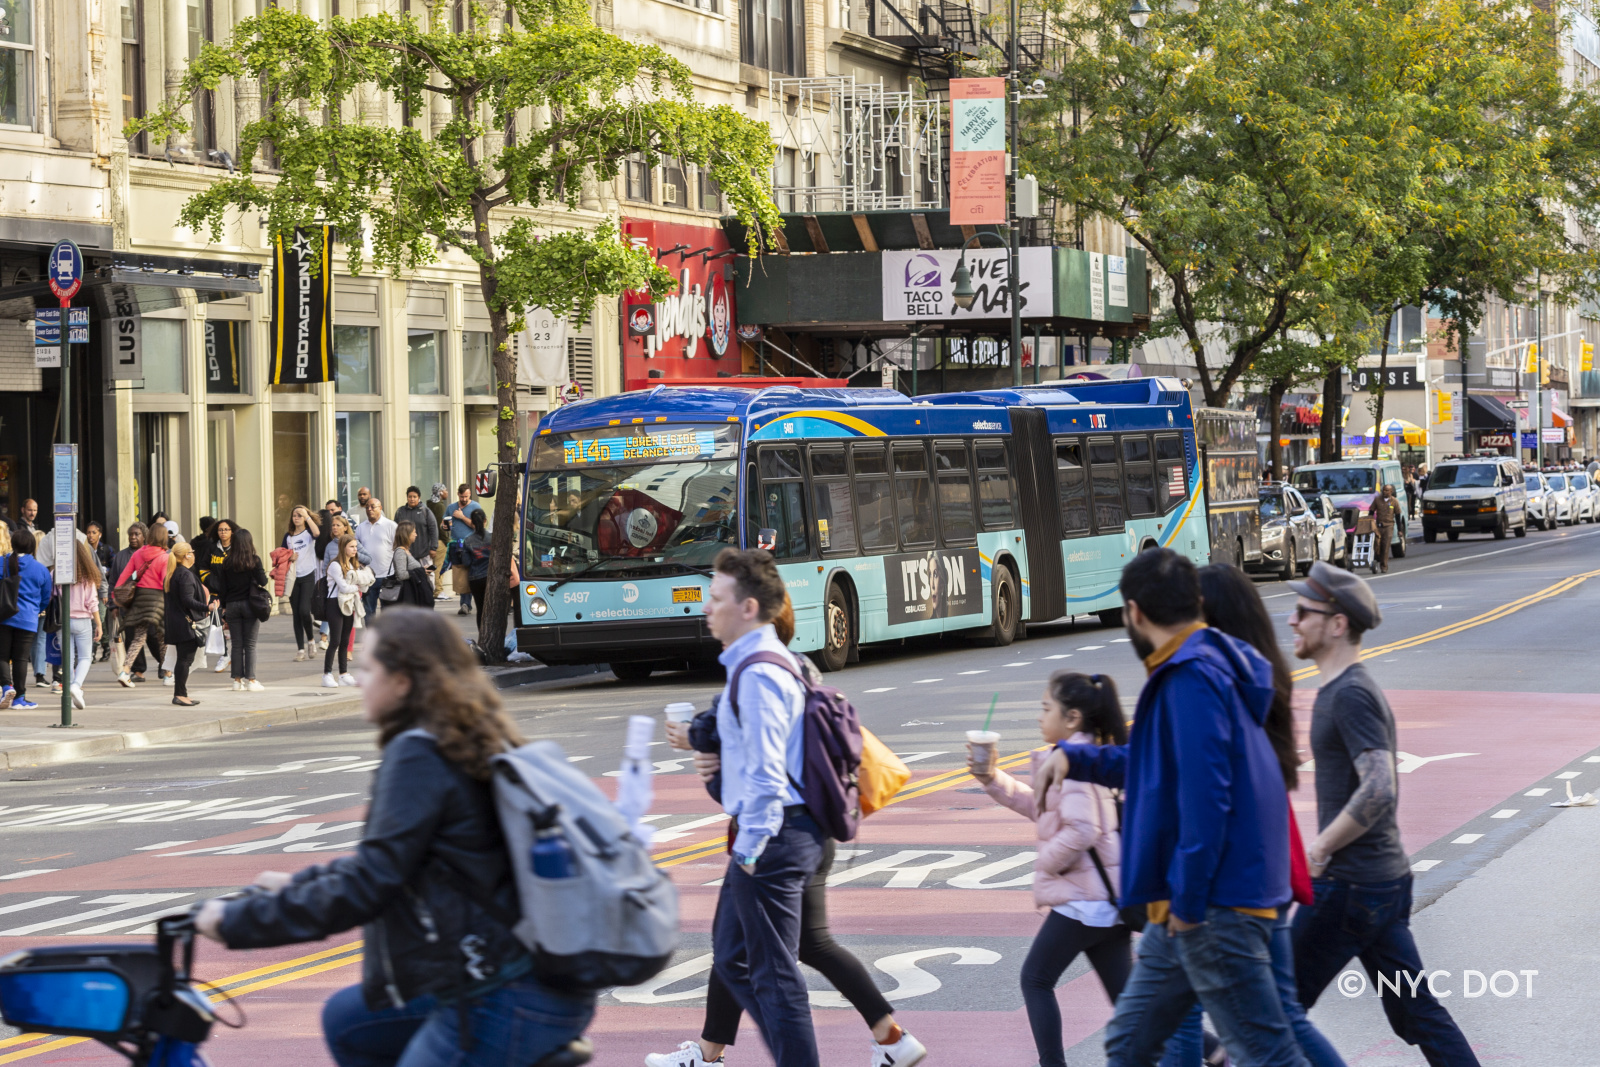 A blue MTA bus picks up passengers on 14th Street. Pedestrians cross the street. The roadway is painted red and marked with the text “Bus and Trucks Only”.